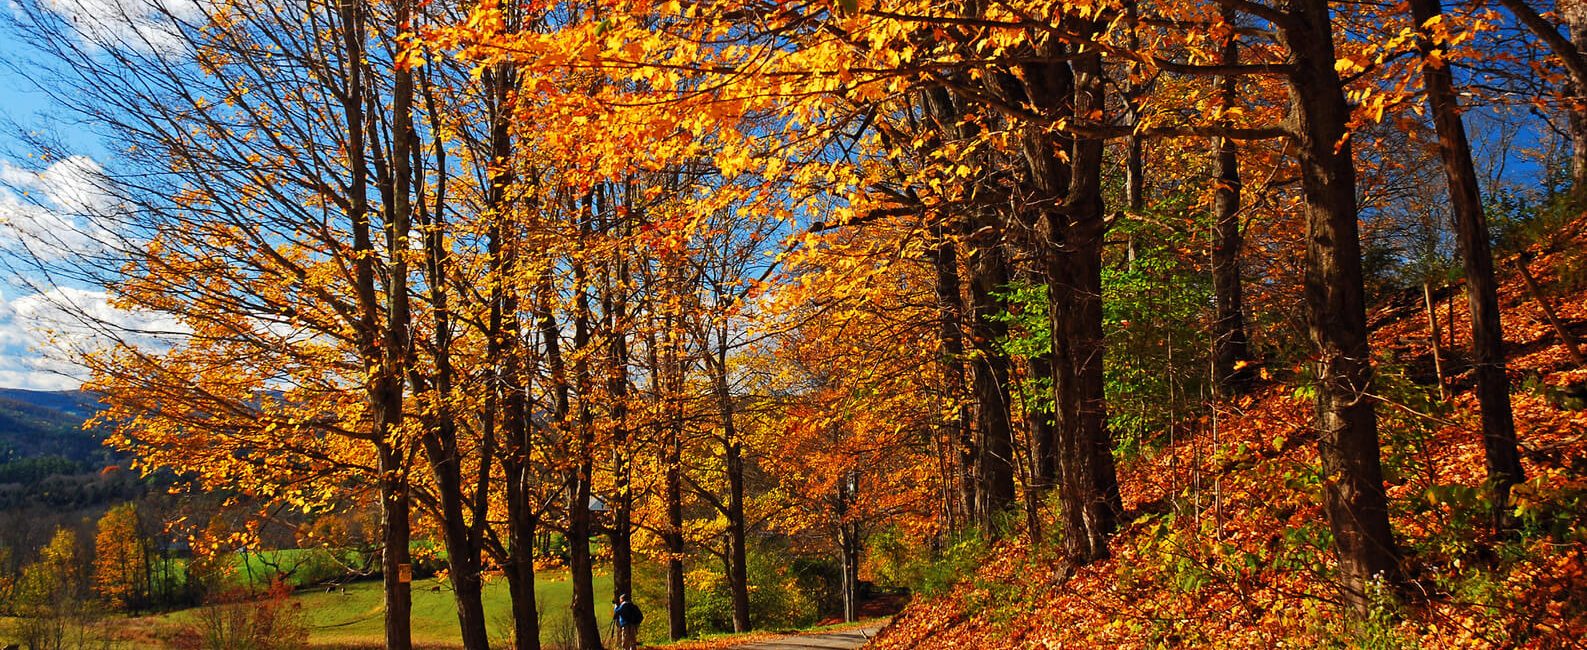 10 of the Top Destinations to See Fall Foliage in the Northeast, US